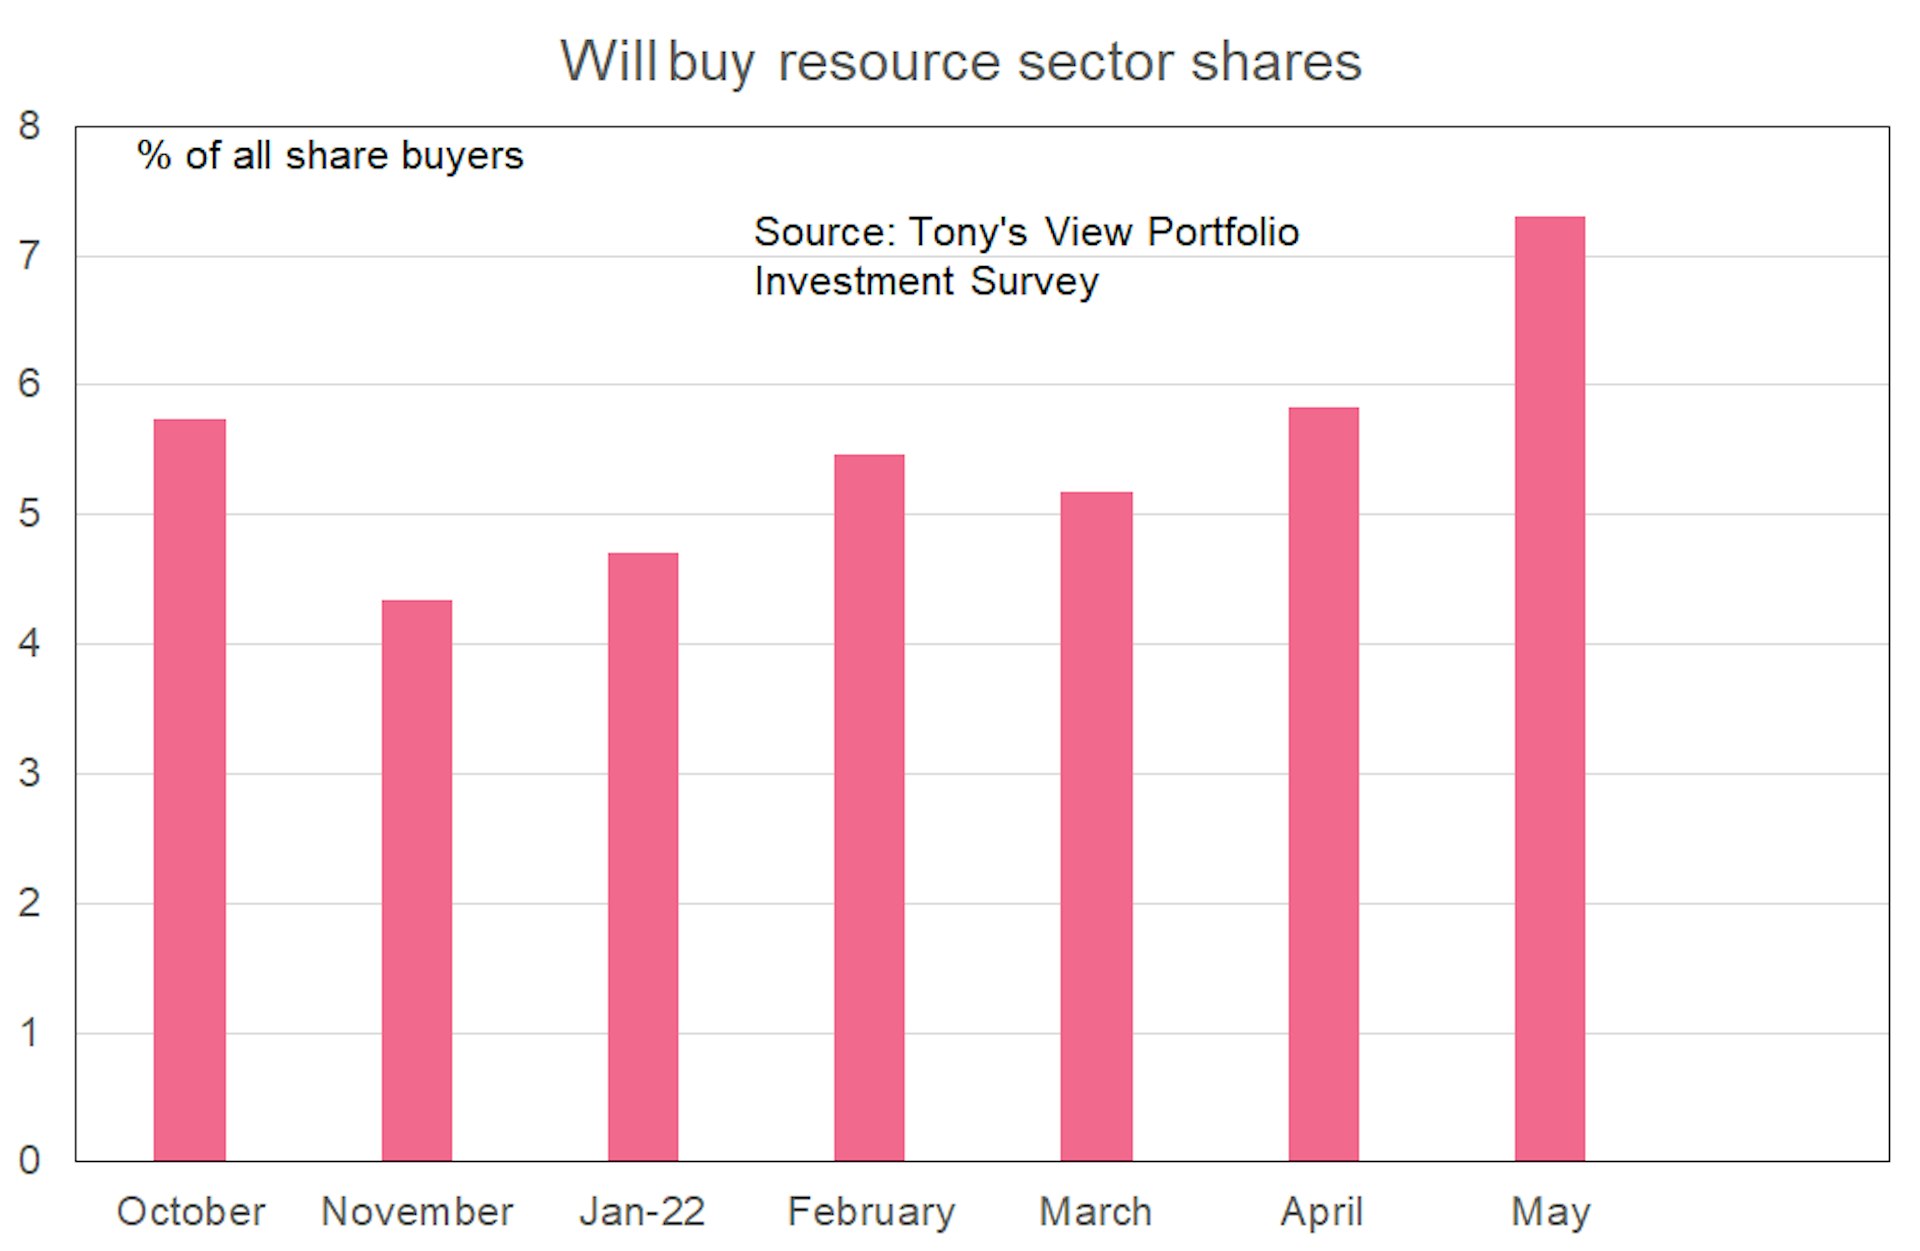 A pink bar graph showing the percentage of all share buyers that will buy resource sector shares. The percentage has risen consistently, from just over 4% in November 2021 to over 7% in May 2022. 